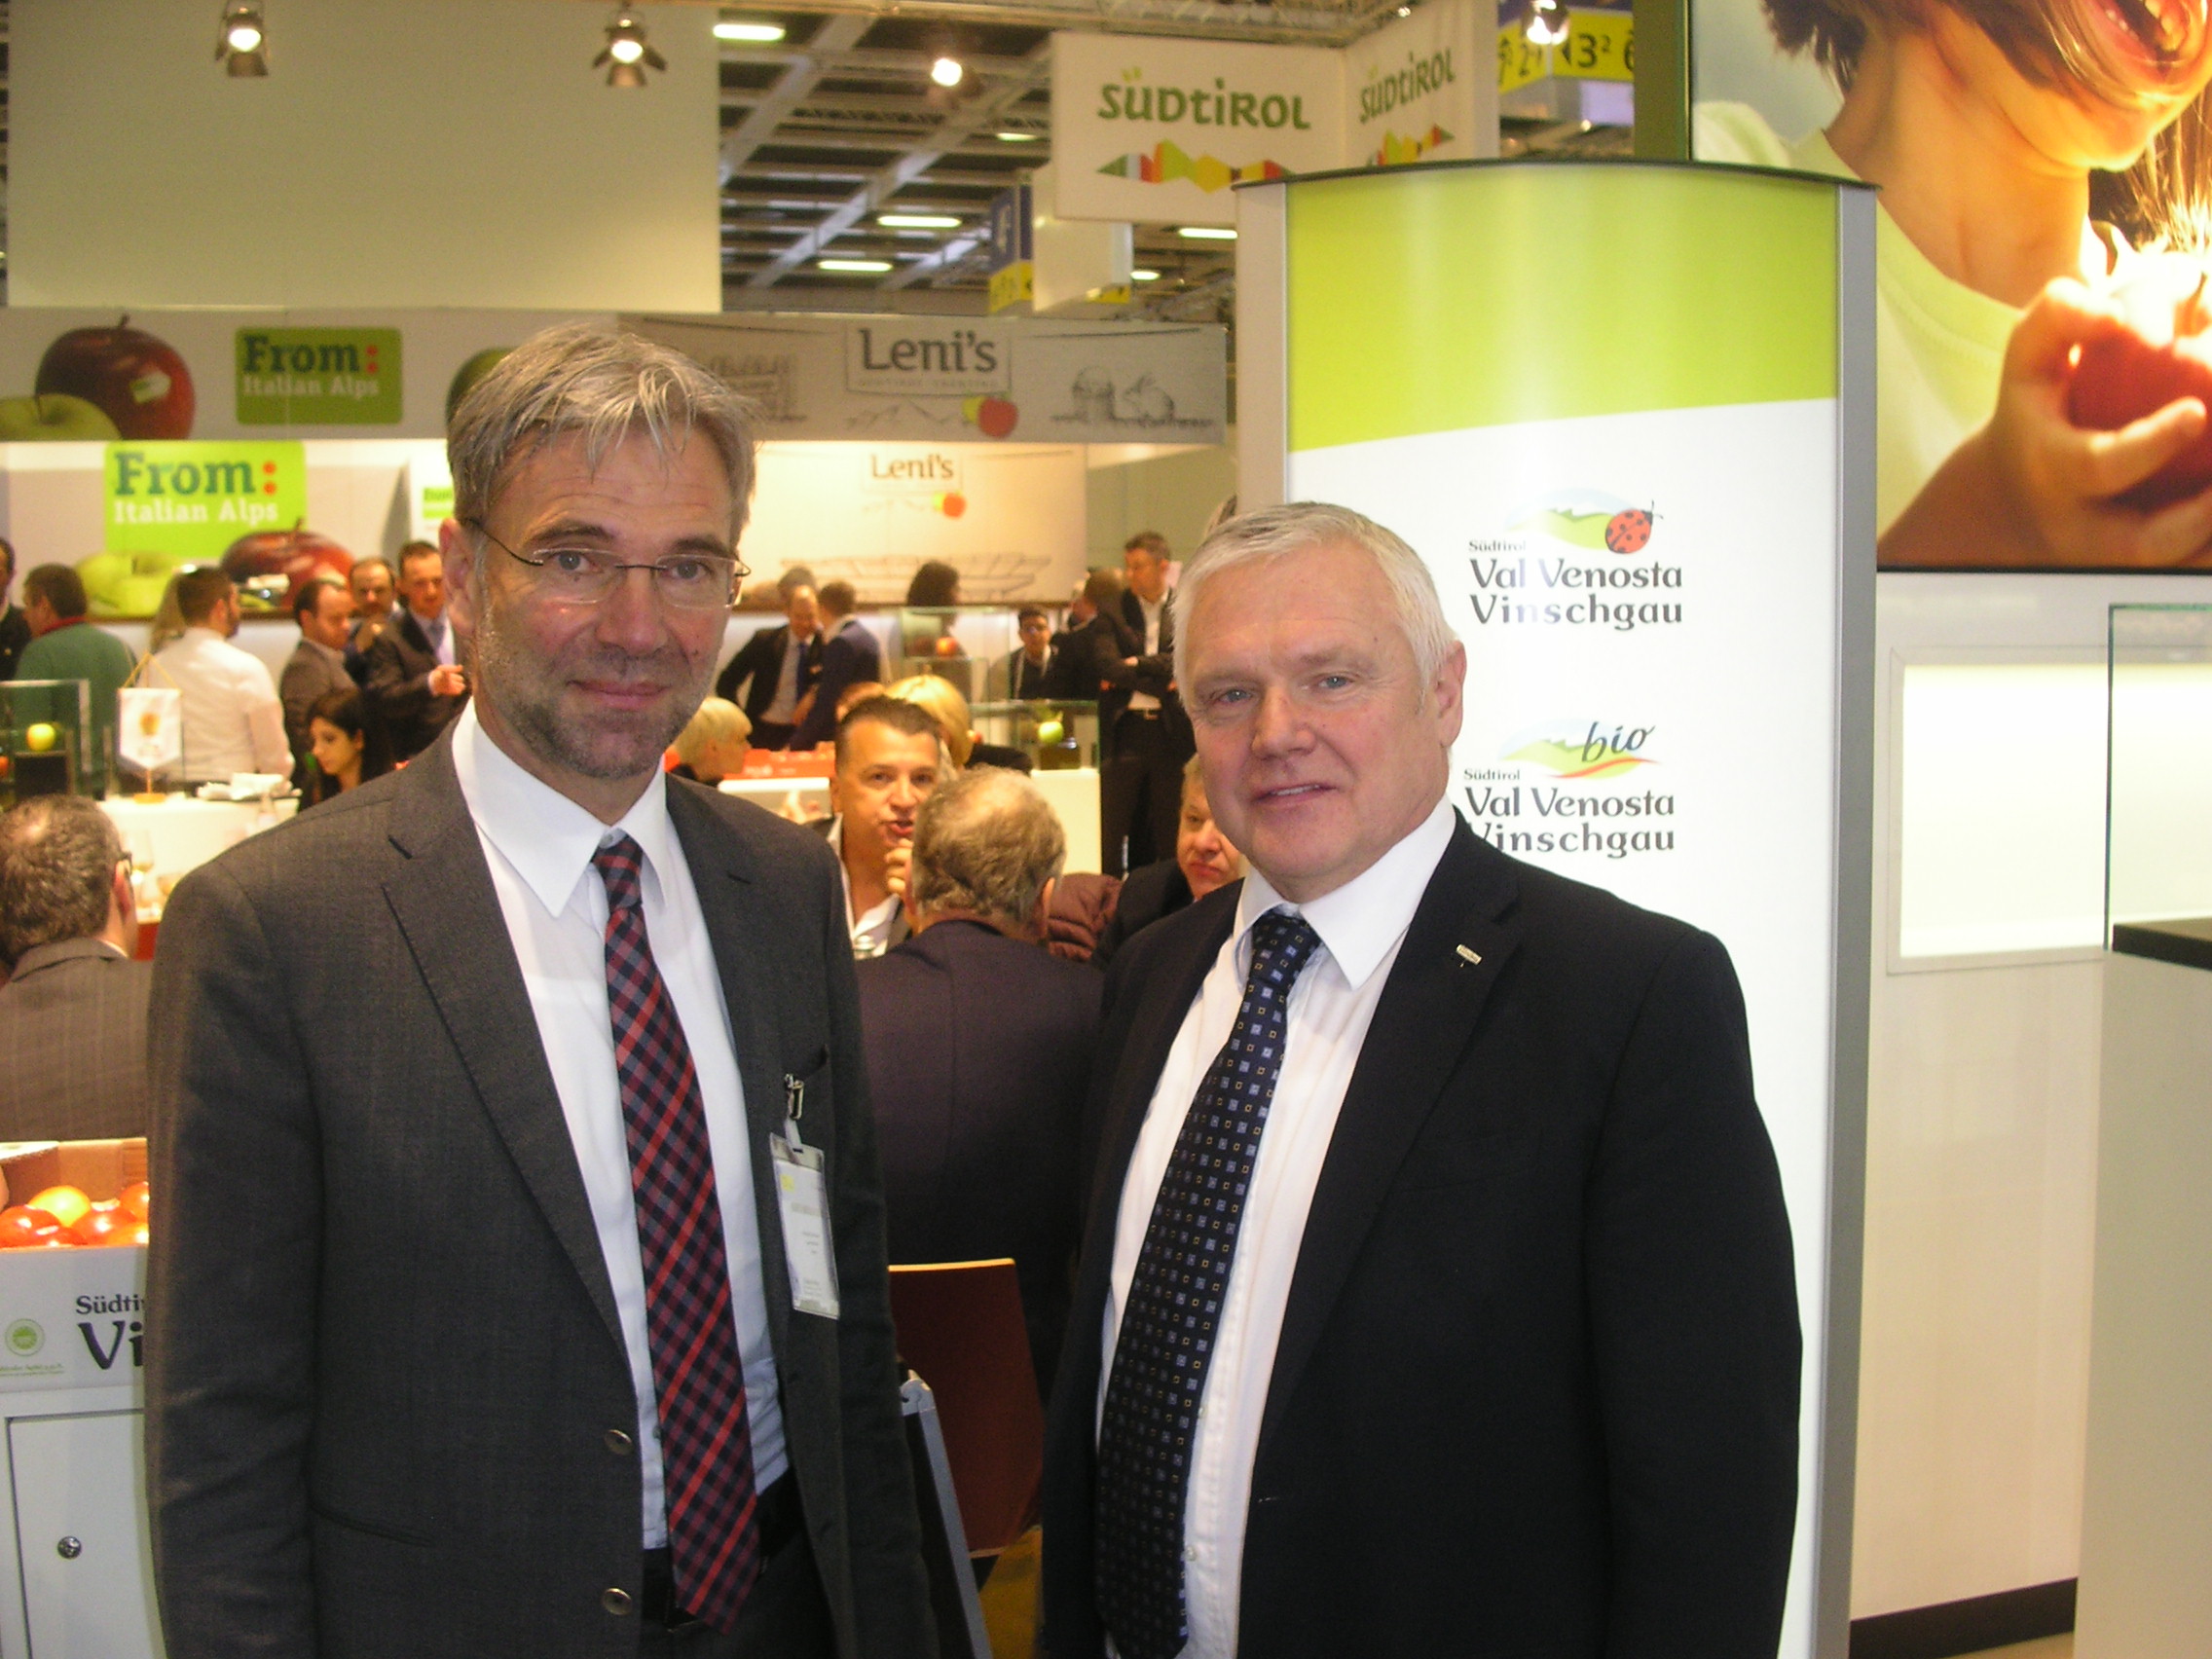 Technology in service of quality: this is the great innovation that VI.P, the Association of Fruit and Vegetable Cooperatives of Val Venosta, presented at Fruit Logistica 2016 in Berlin.